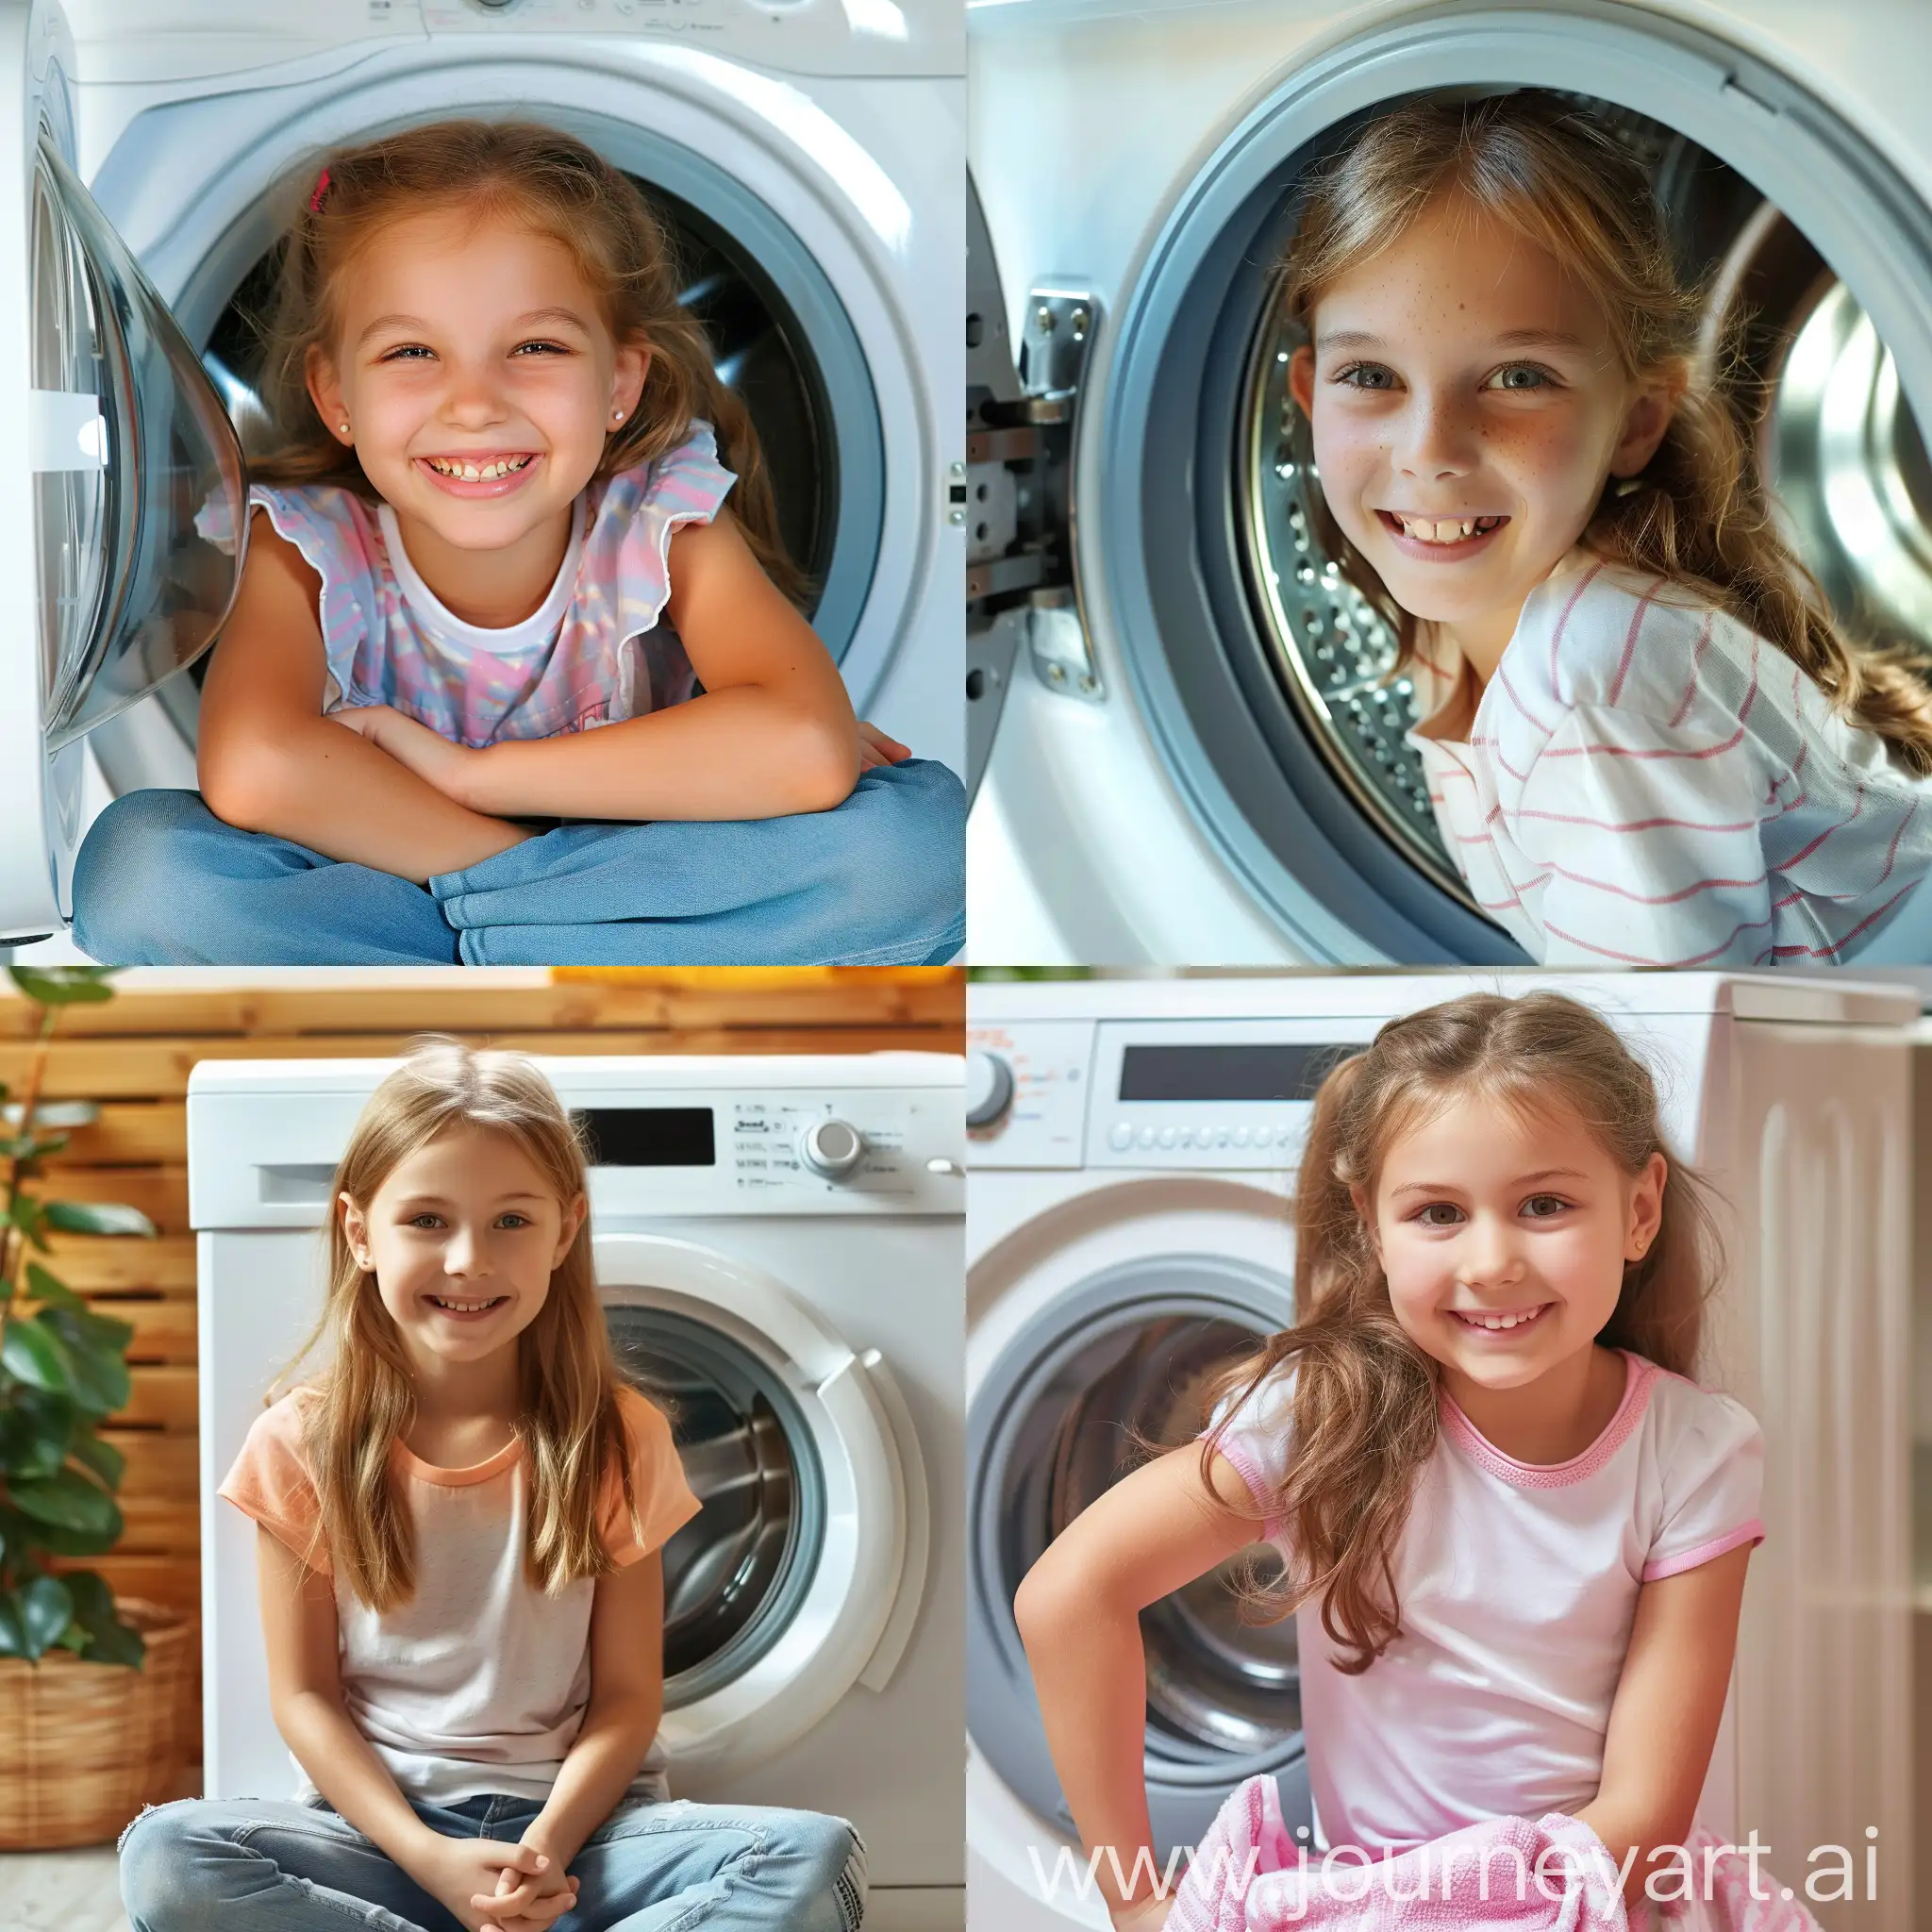 Happy young schoolgirl washed laundered in safe front loader washing machine.